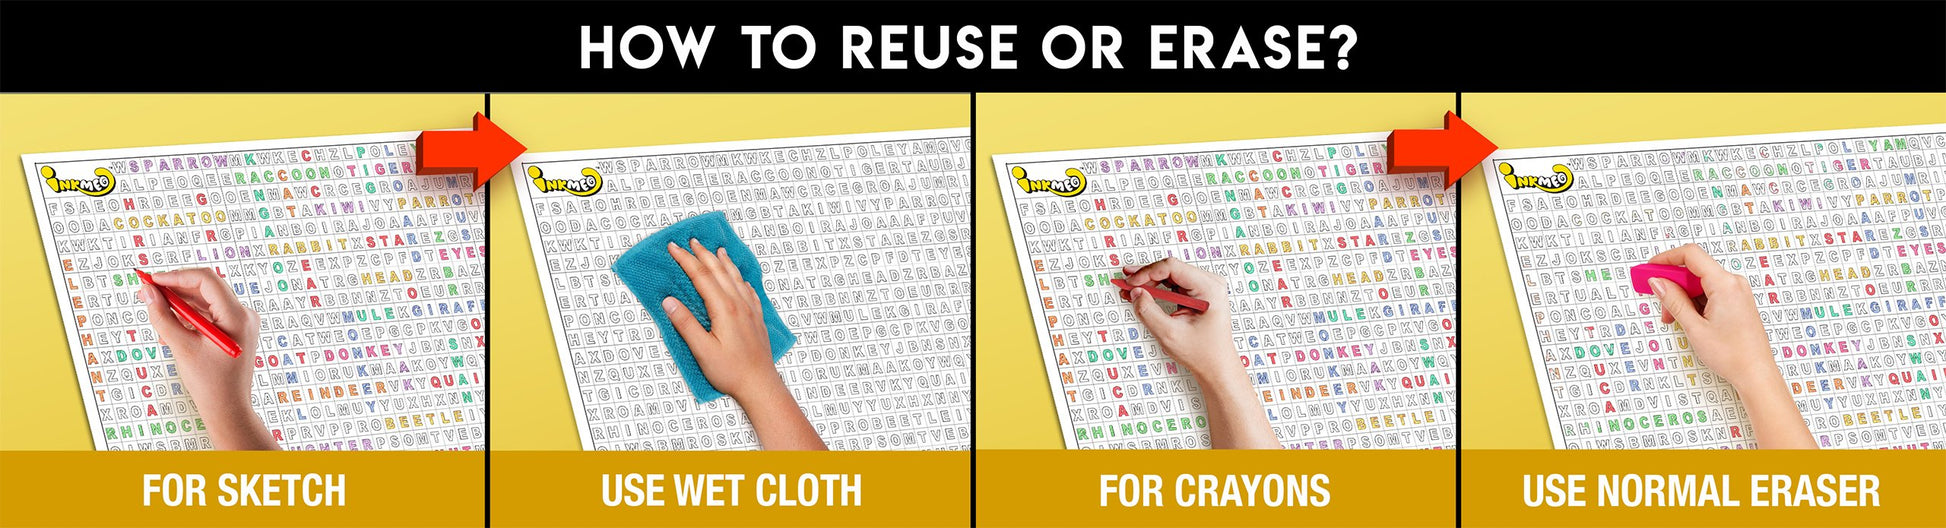 The image has a yellow background with four pictures demonstrating how to reuse or erase: the first picture depicts sketching on the puzzle sheet, the second shows using a wet cloth to remove sketches, the third image displays crayons coloring on the puzzle sheet, and the fourth image illustrates erasing crayons with a regular eraser.